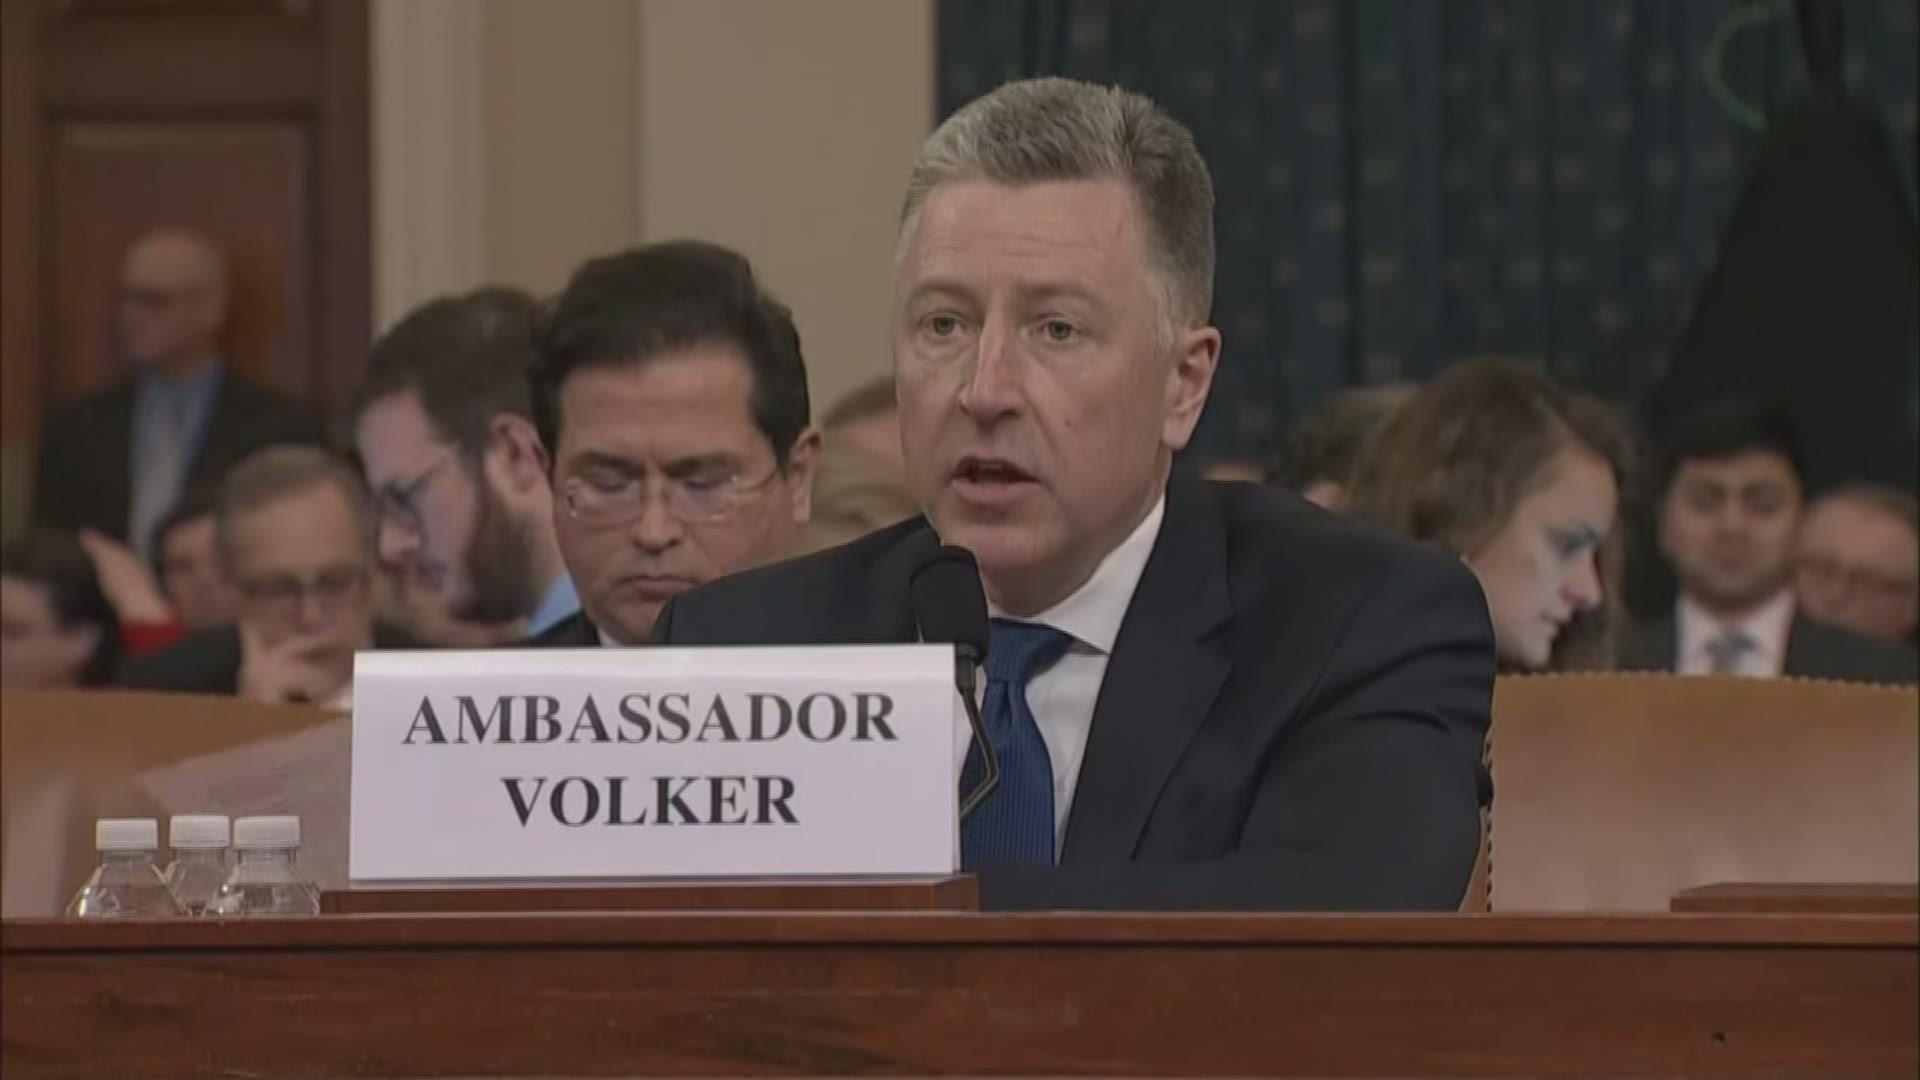 Former Ukraine special envoy Kurt Volker delivered opening remarks before testifying at the public impeachment hearing on Capitol Hill, Tuesday.